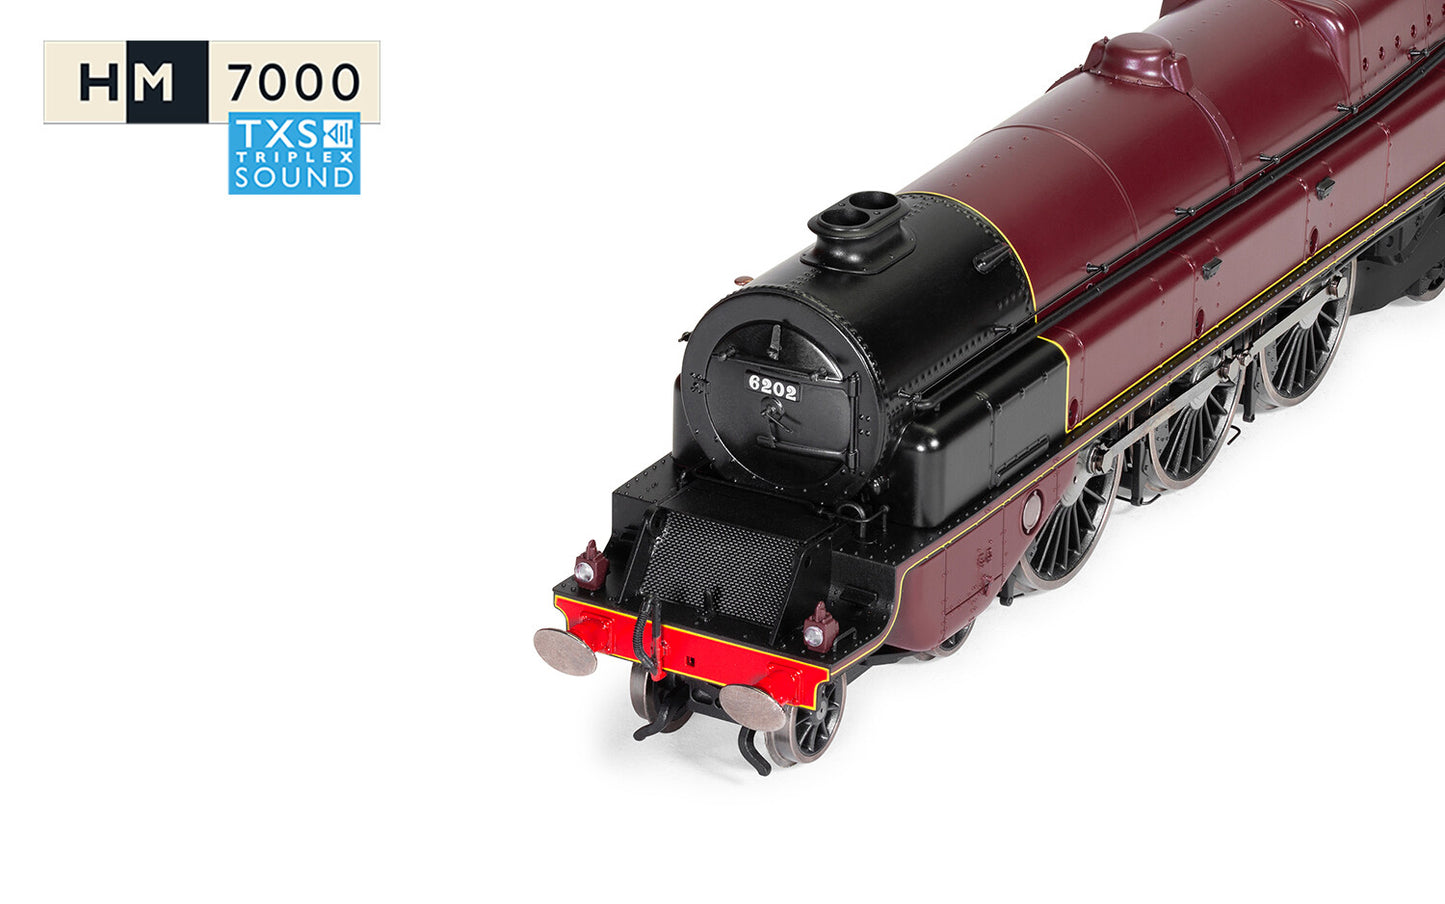 Hornby R30134TXS - LMS Princess Royal Class 'The Turbomotive' 4-6-2 No.6202 (SOUND FITTED)